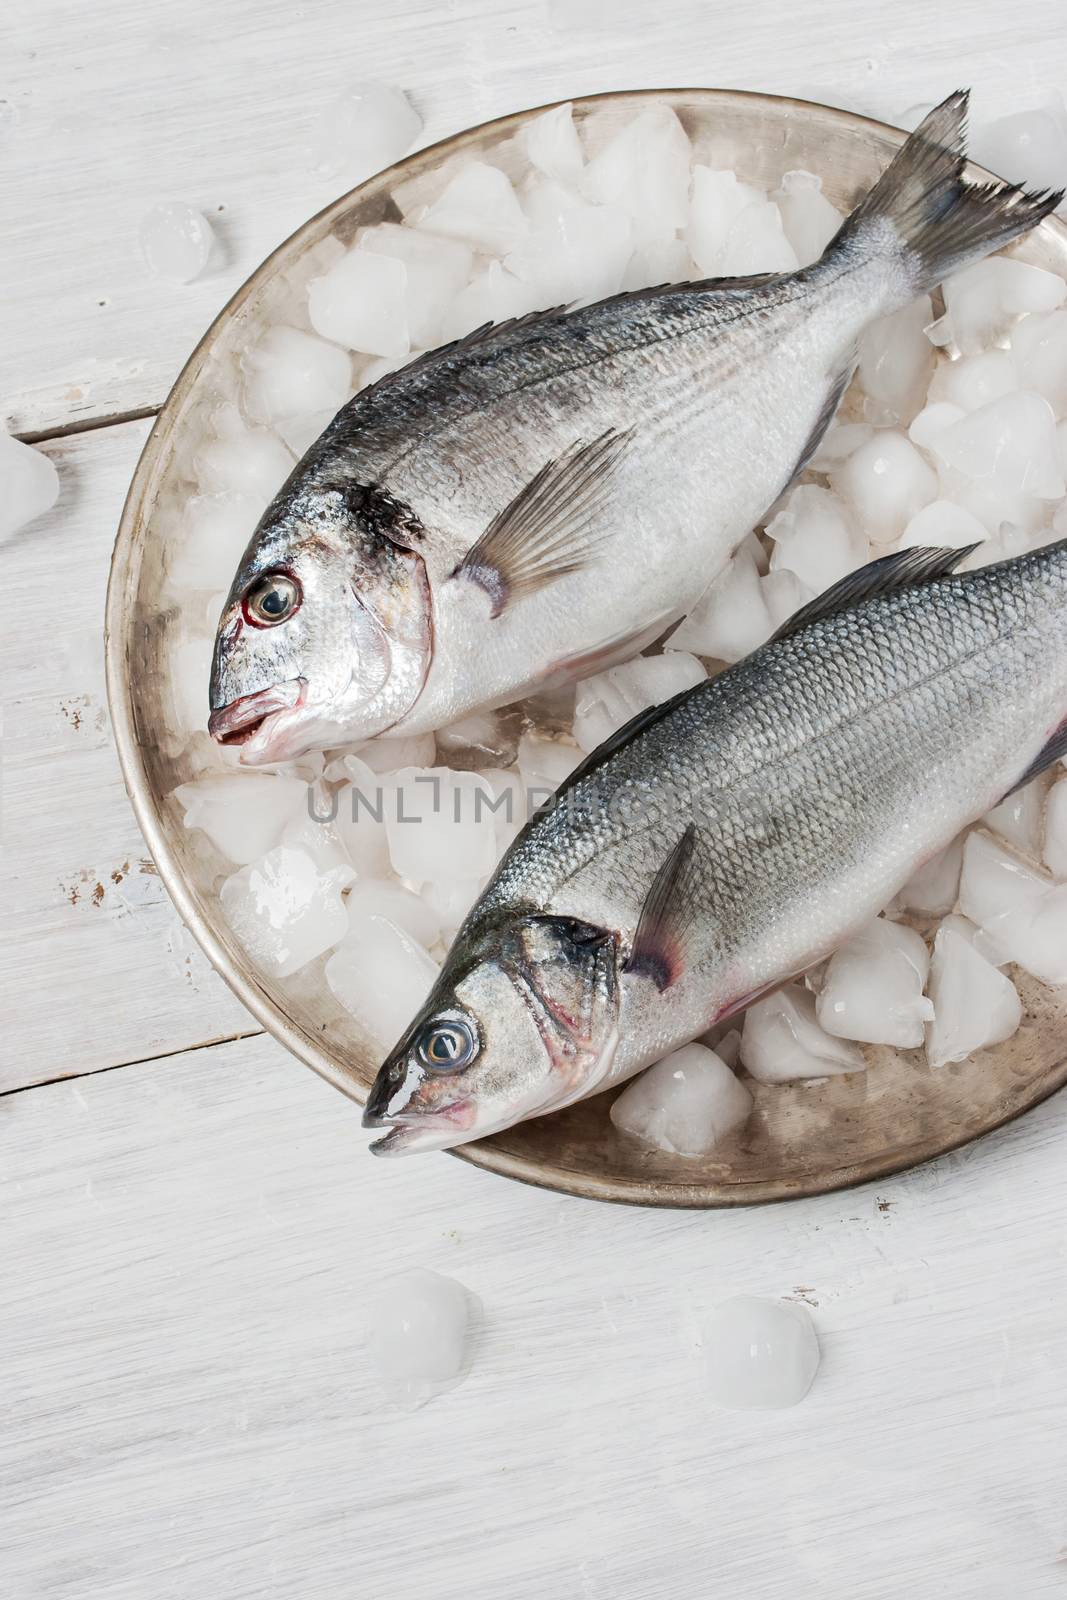 Dorado fish and sea bass on the metal plate with ice by Deniskarpenkov